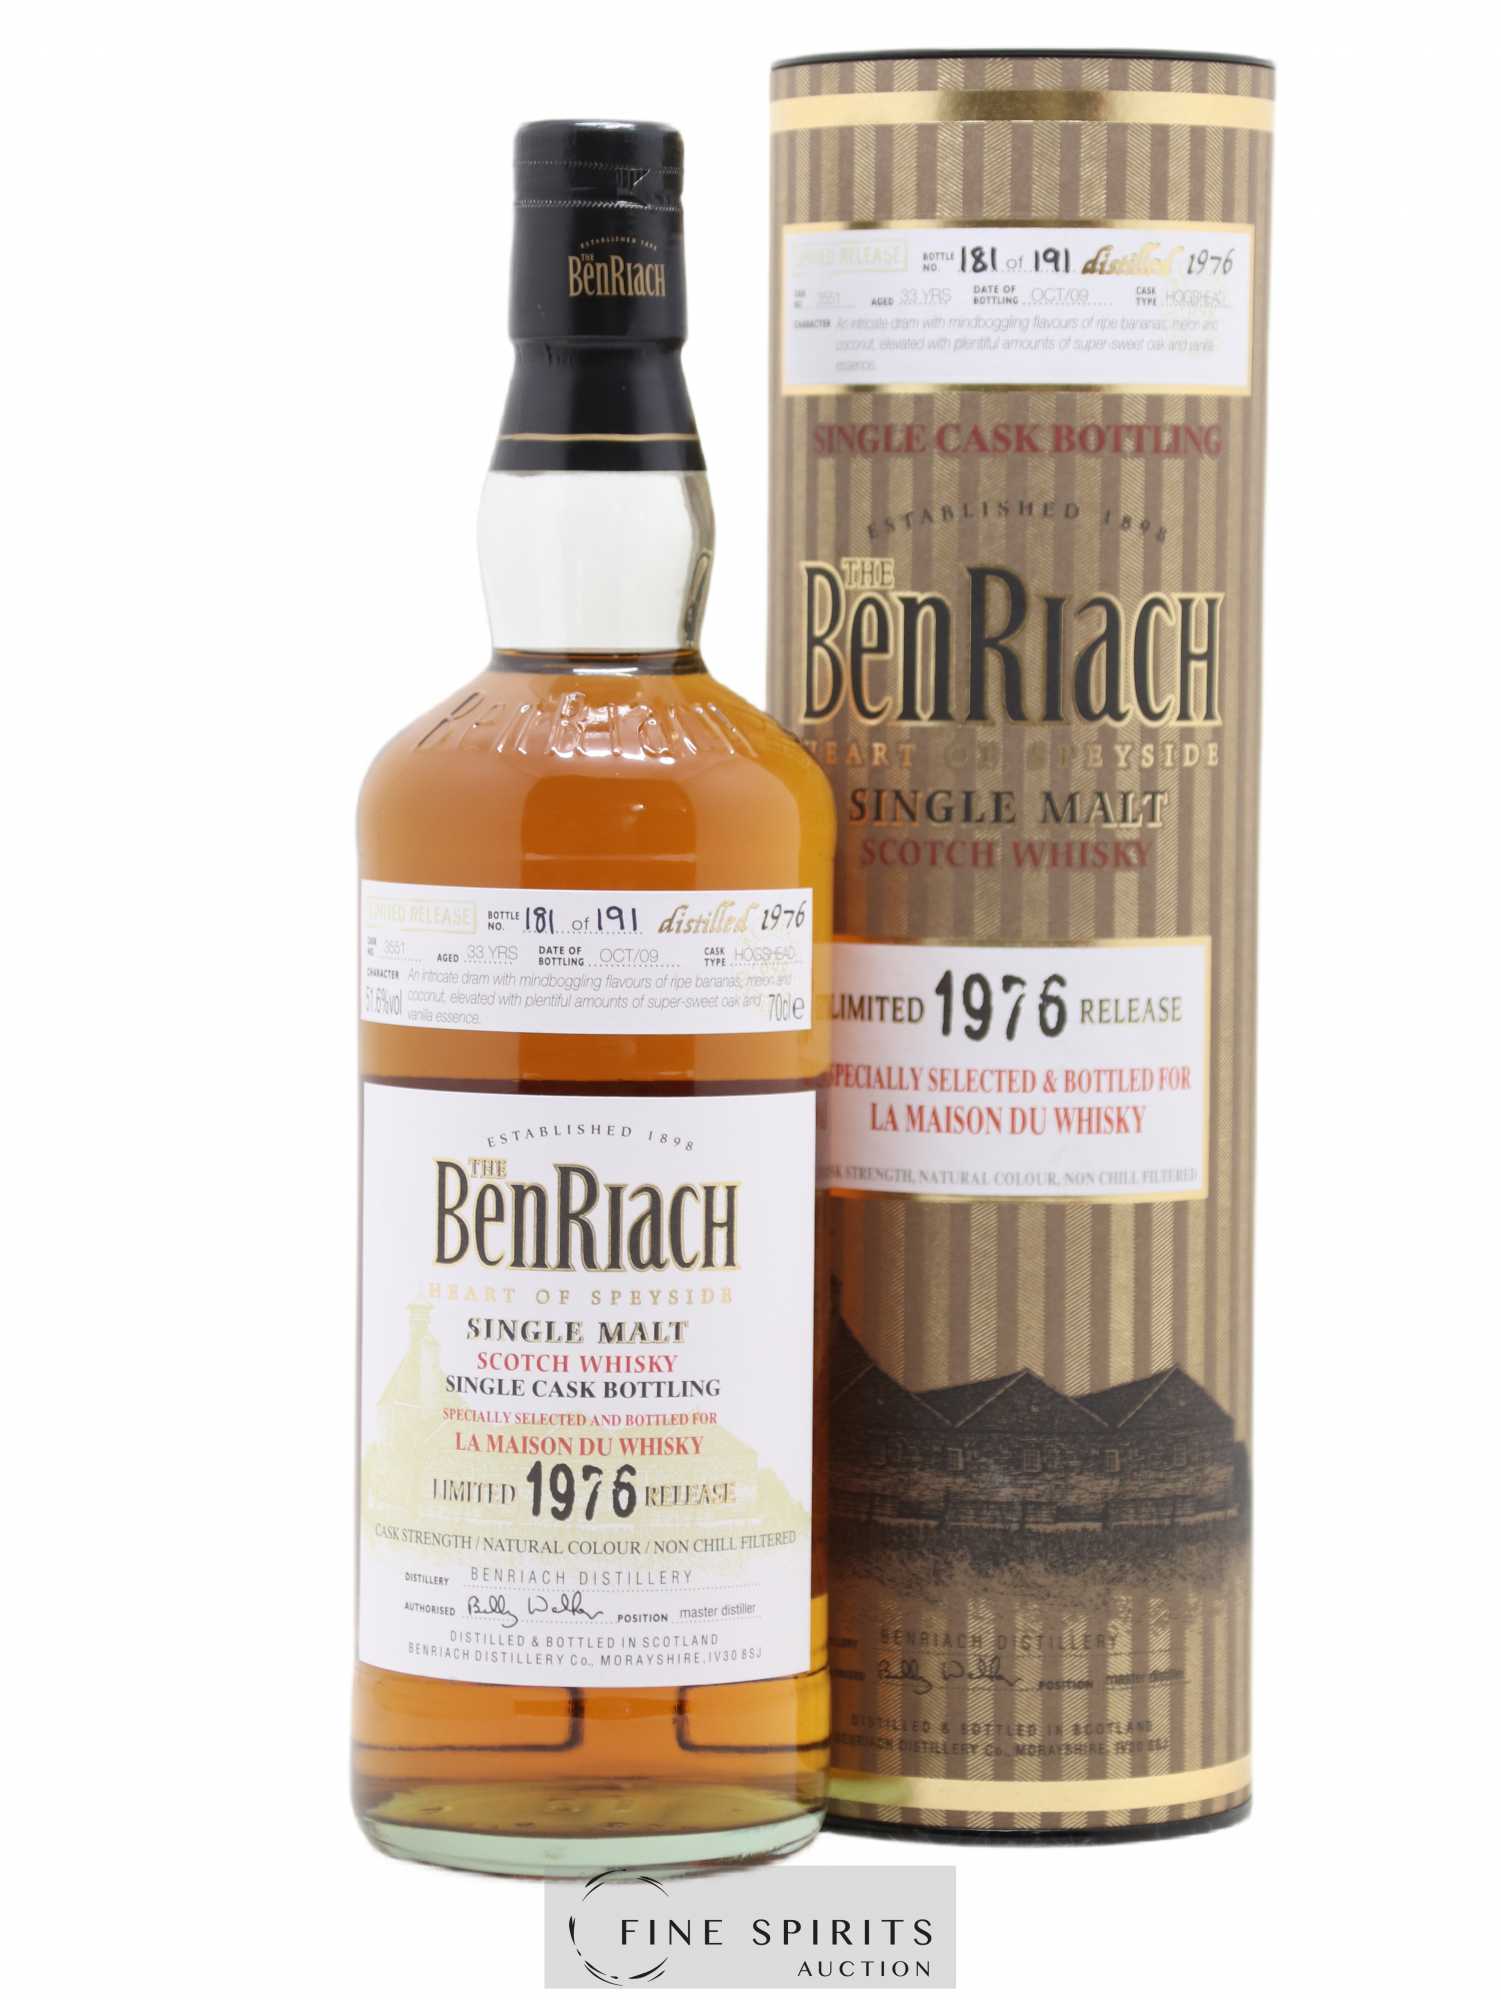 Benriach 33 years 1976 Of. Cask n°3551 - One of 191 - bottled 2009 LMDW Limited Release 